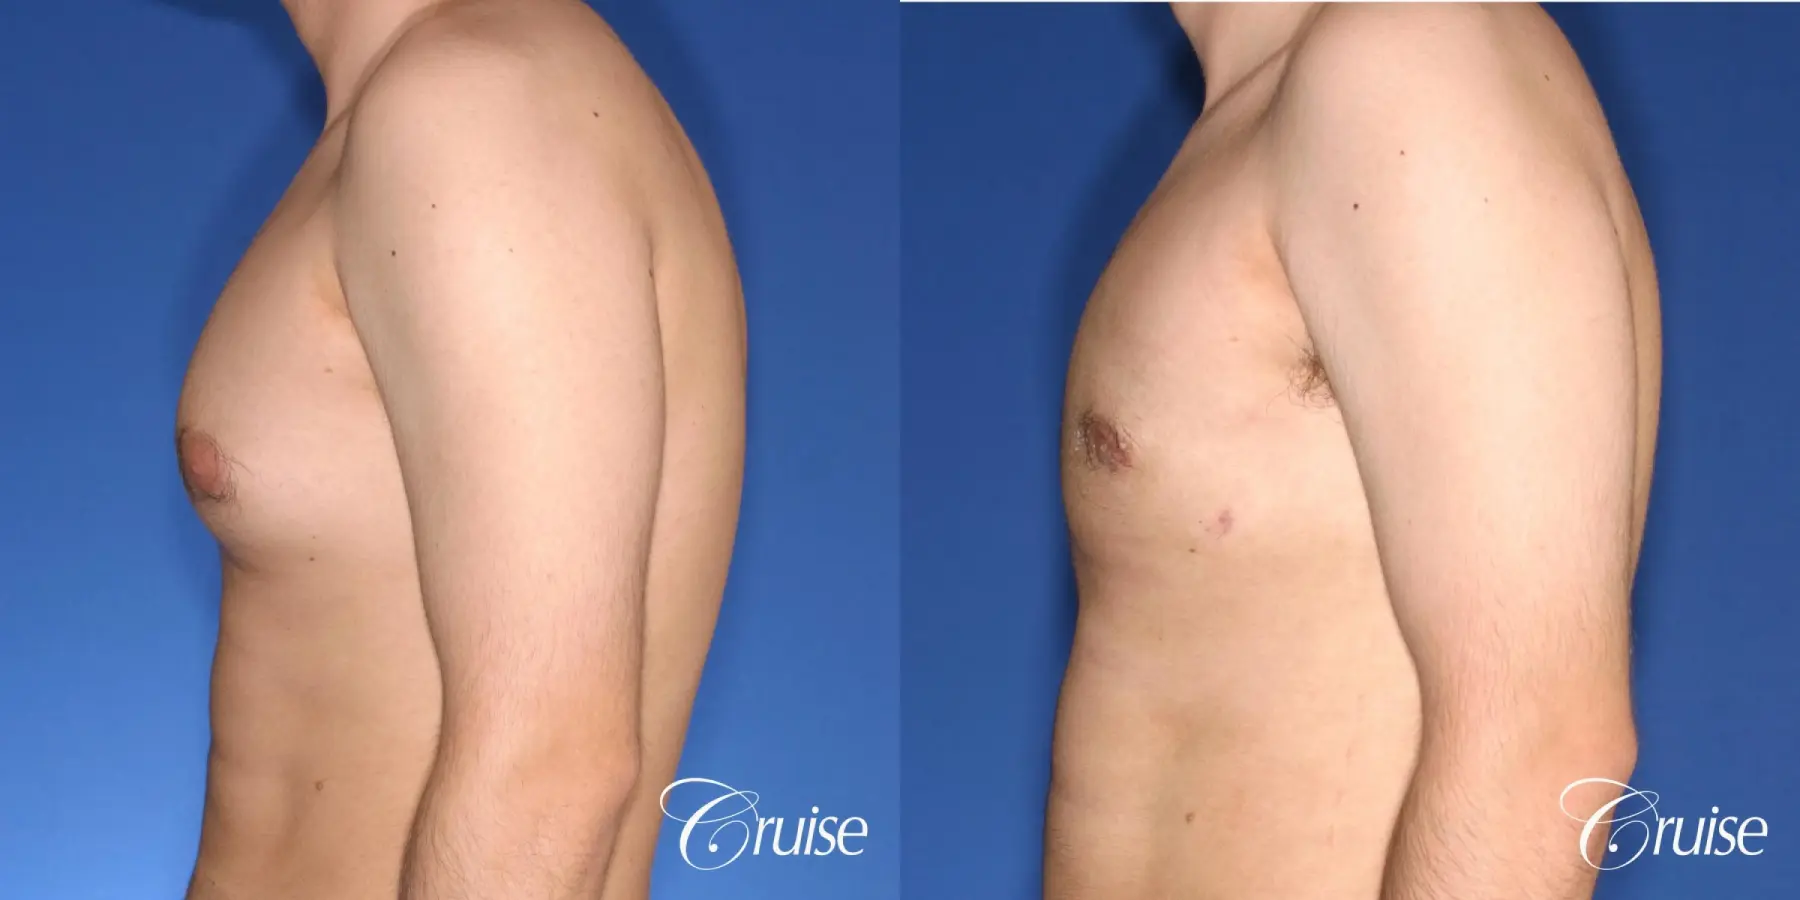 moderate gynecomastia puffy nipple - Before and After 2